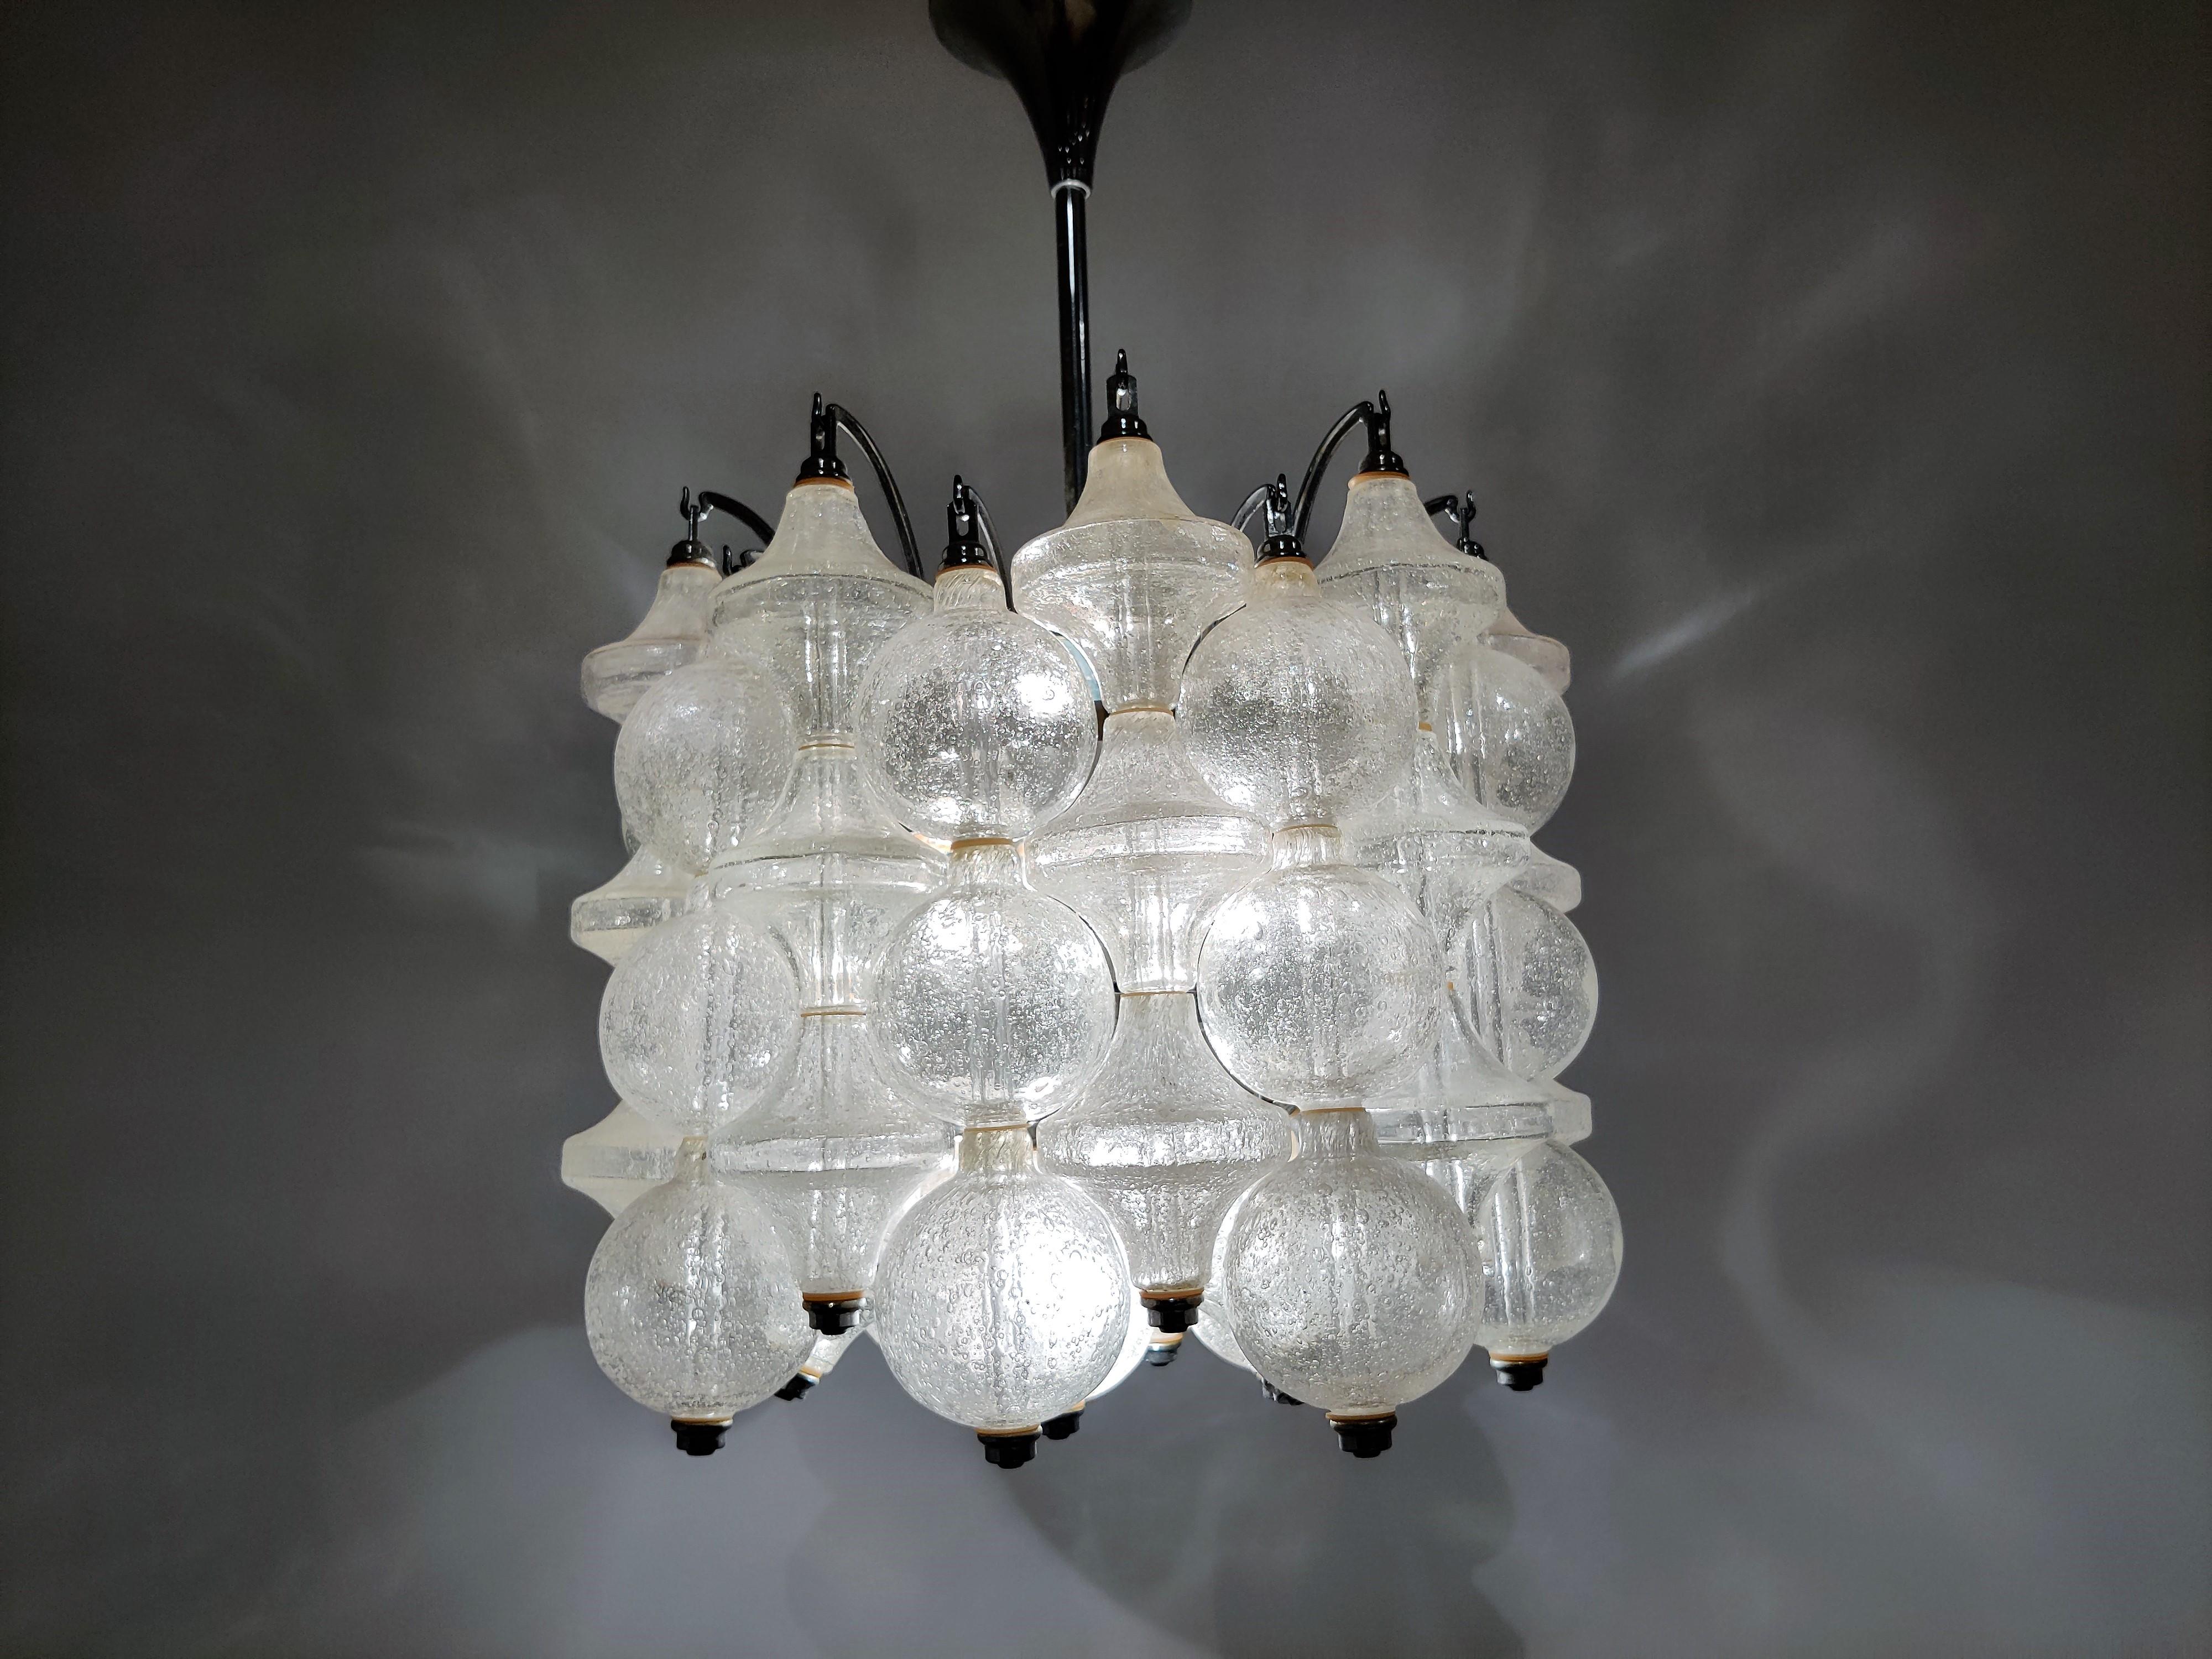 Fantastic chandelier model 'tulipan' by Kalmar.

Beautiful handmade tulip shaped bubble glasses.

This chandelier doesnt only look spectacular but also emits a wonderful light. 

The name is derived from the tulip shaped glasses.

Comes with